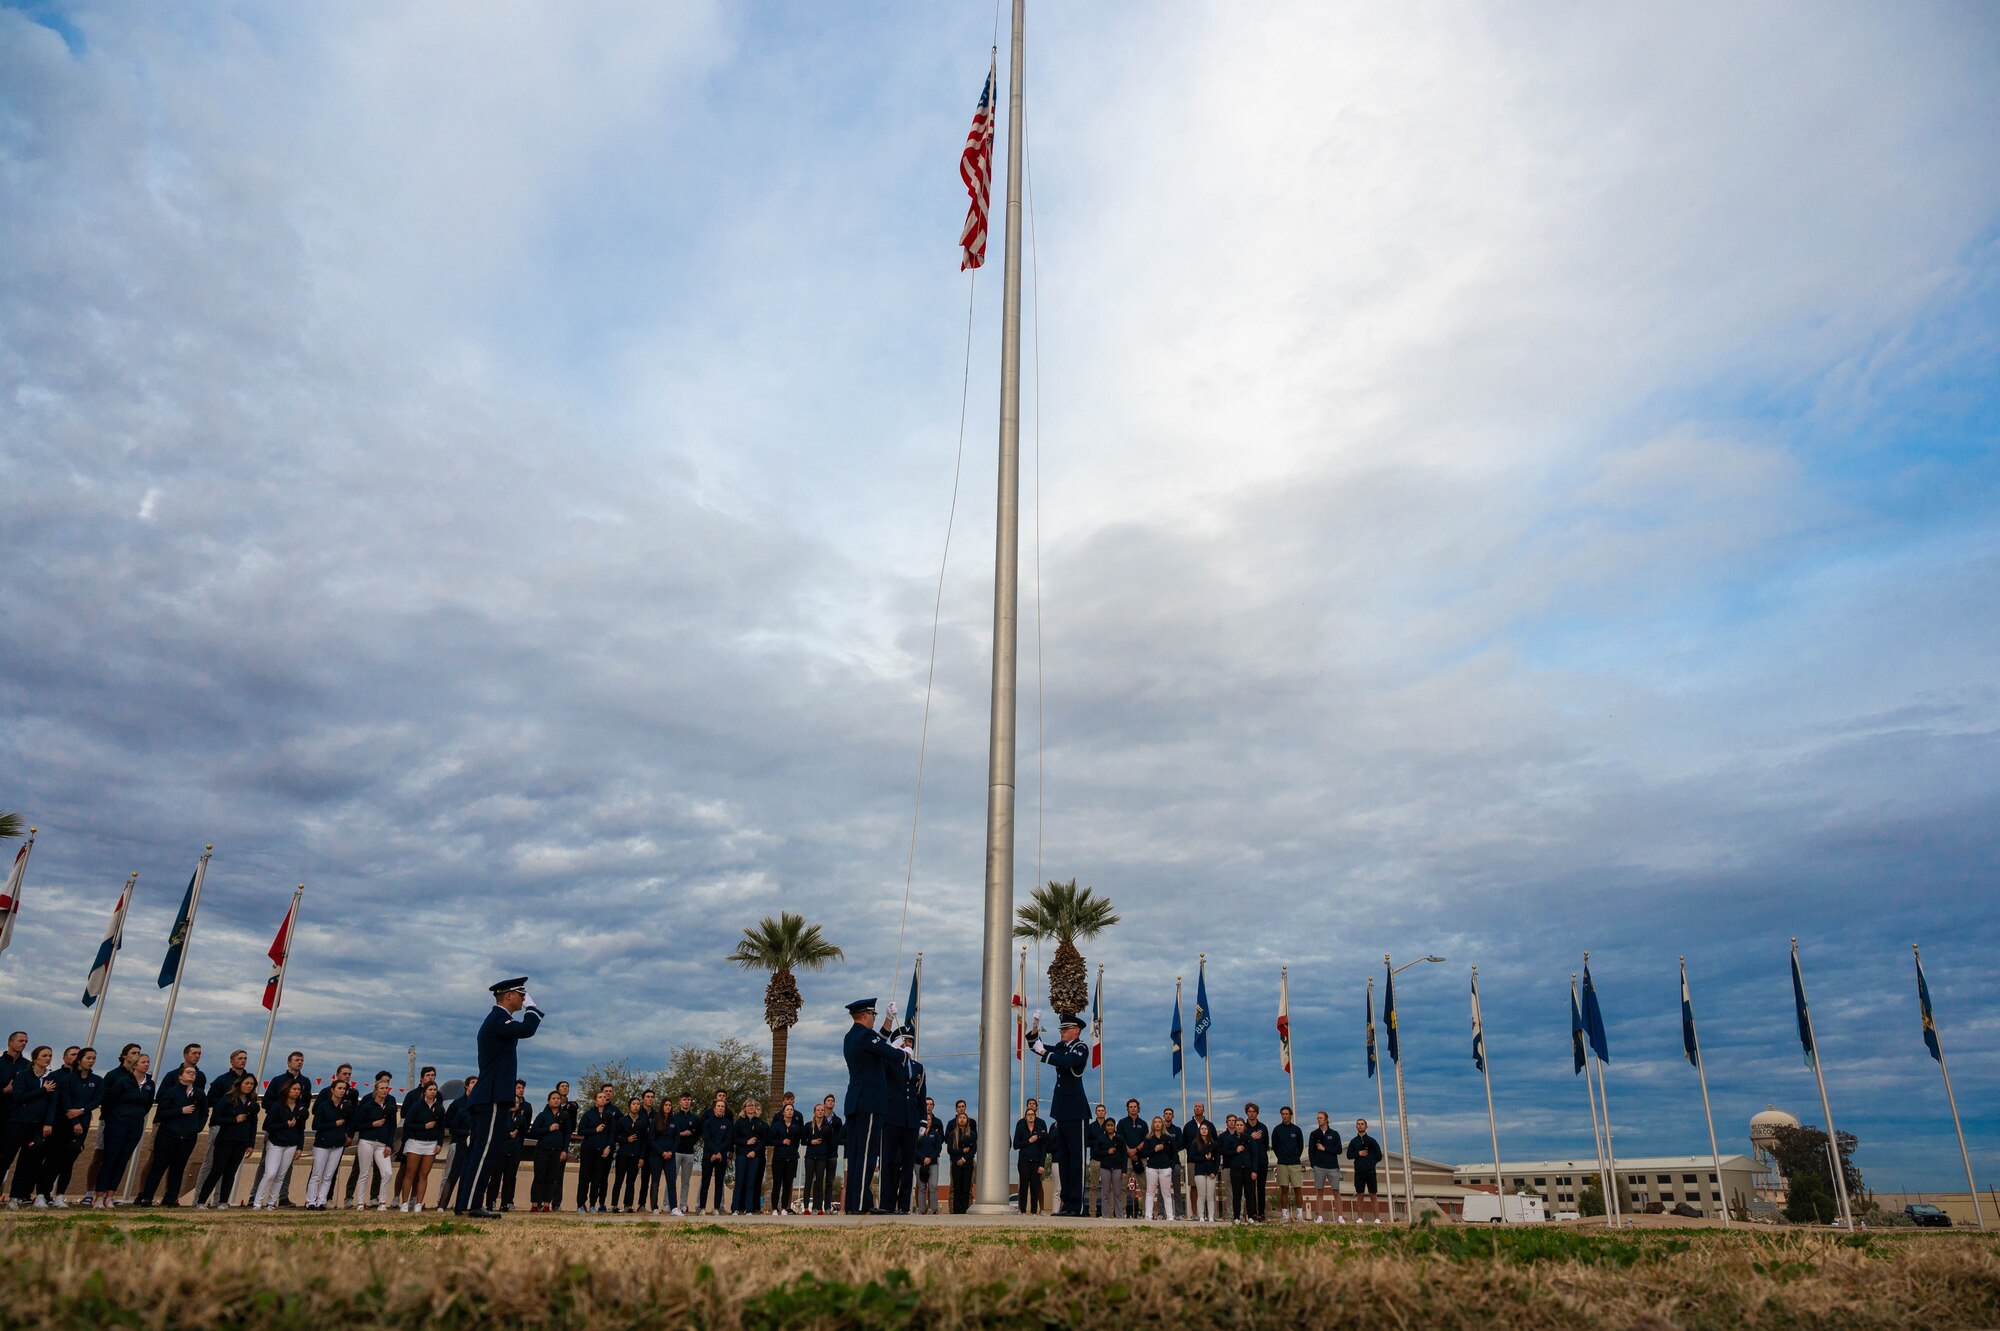 Participants of the Patriot All-American golf tournament watch as the U.S. flag is lowered during a retreat ceremony, Dec. 27, 2022, at Luke Air Force Base, Arizona.